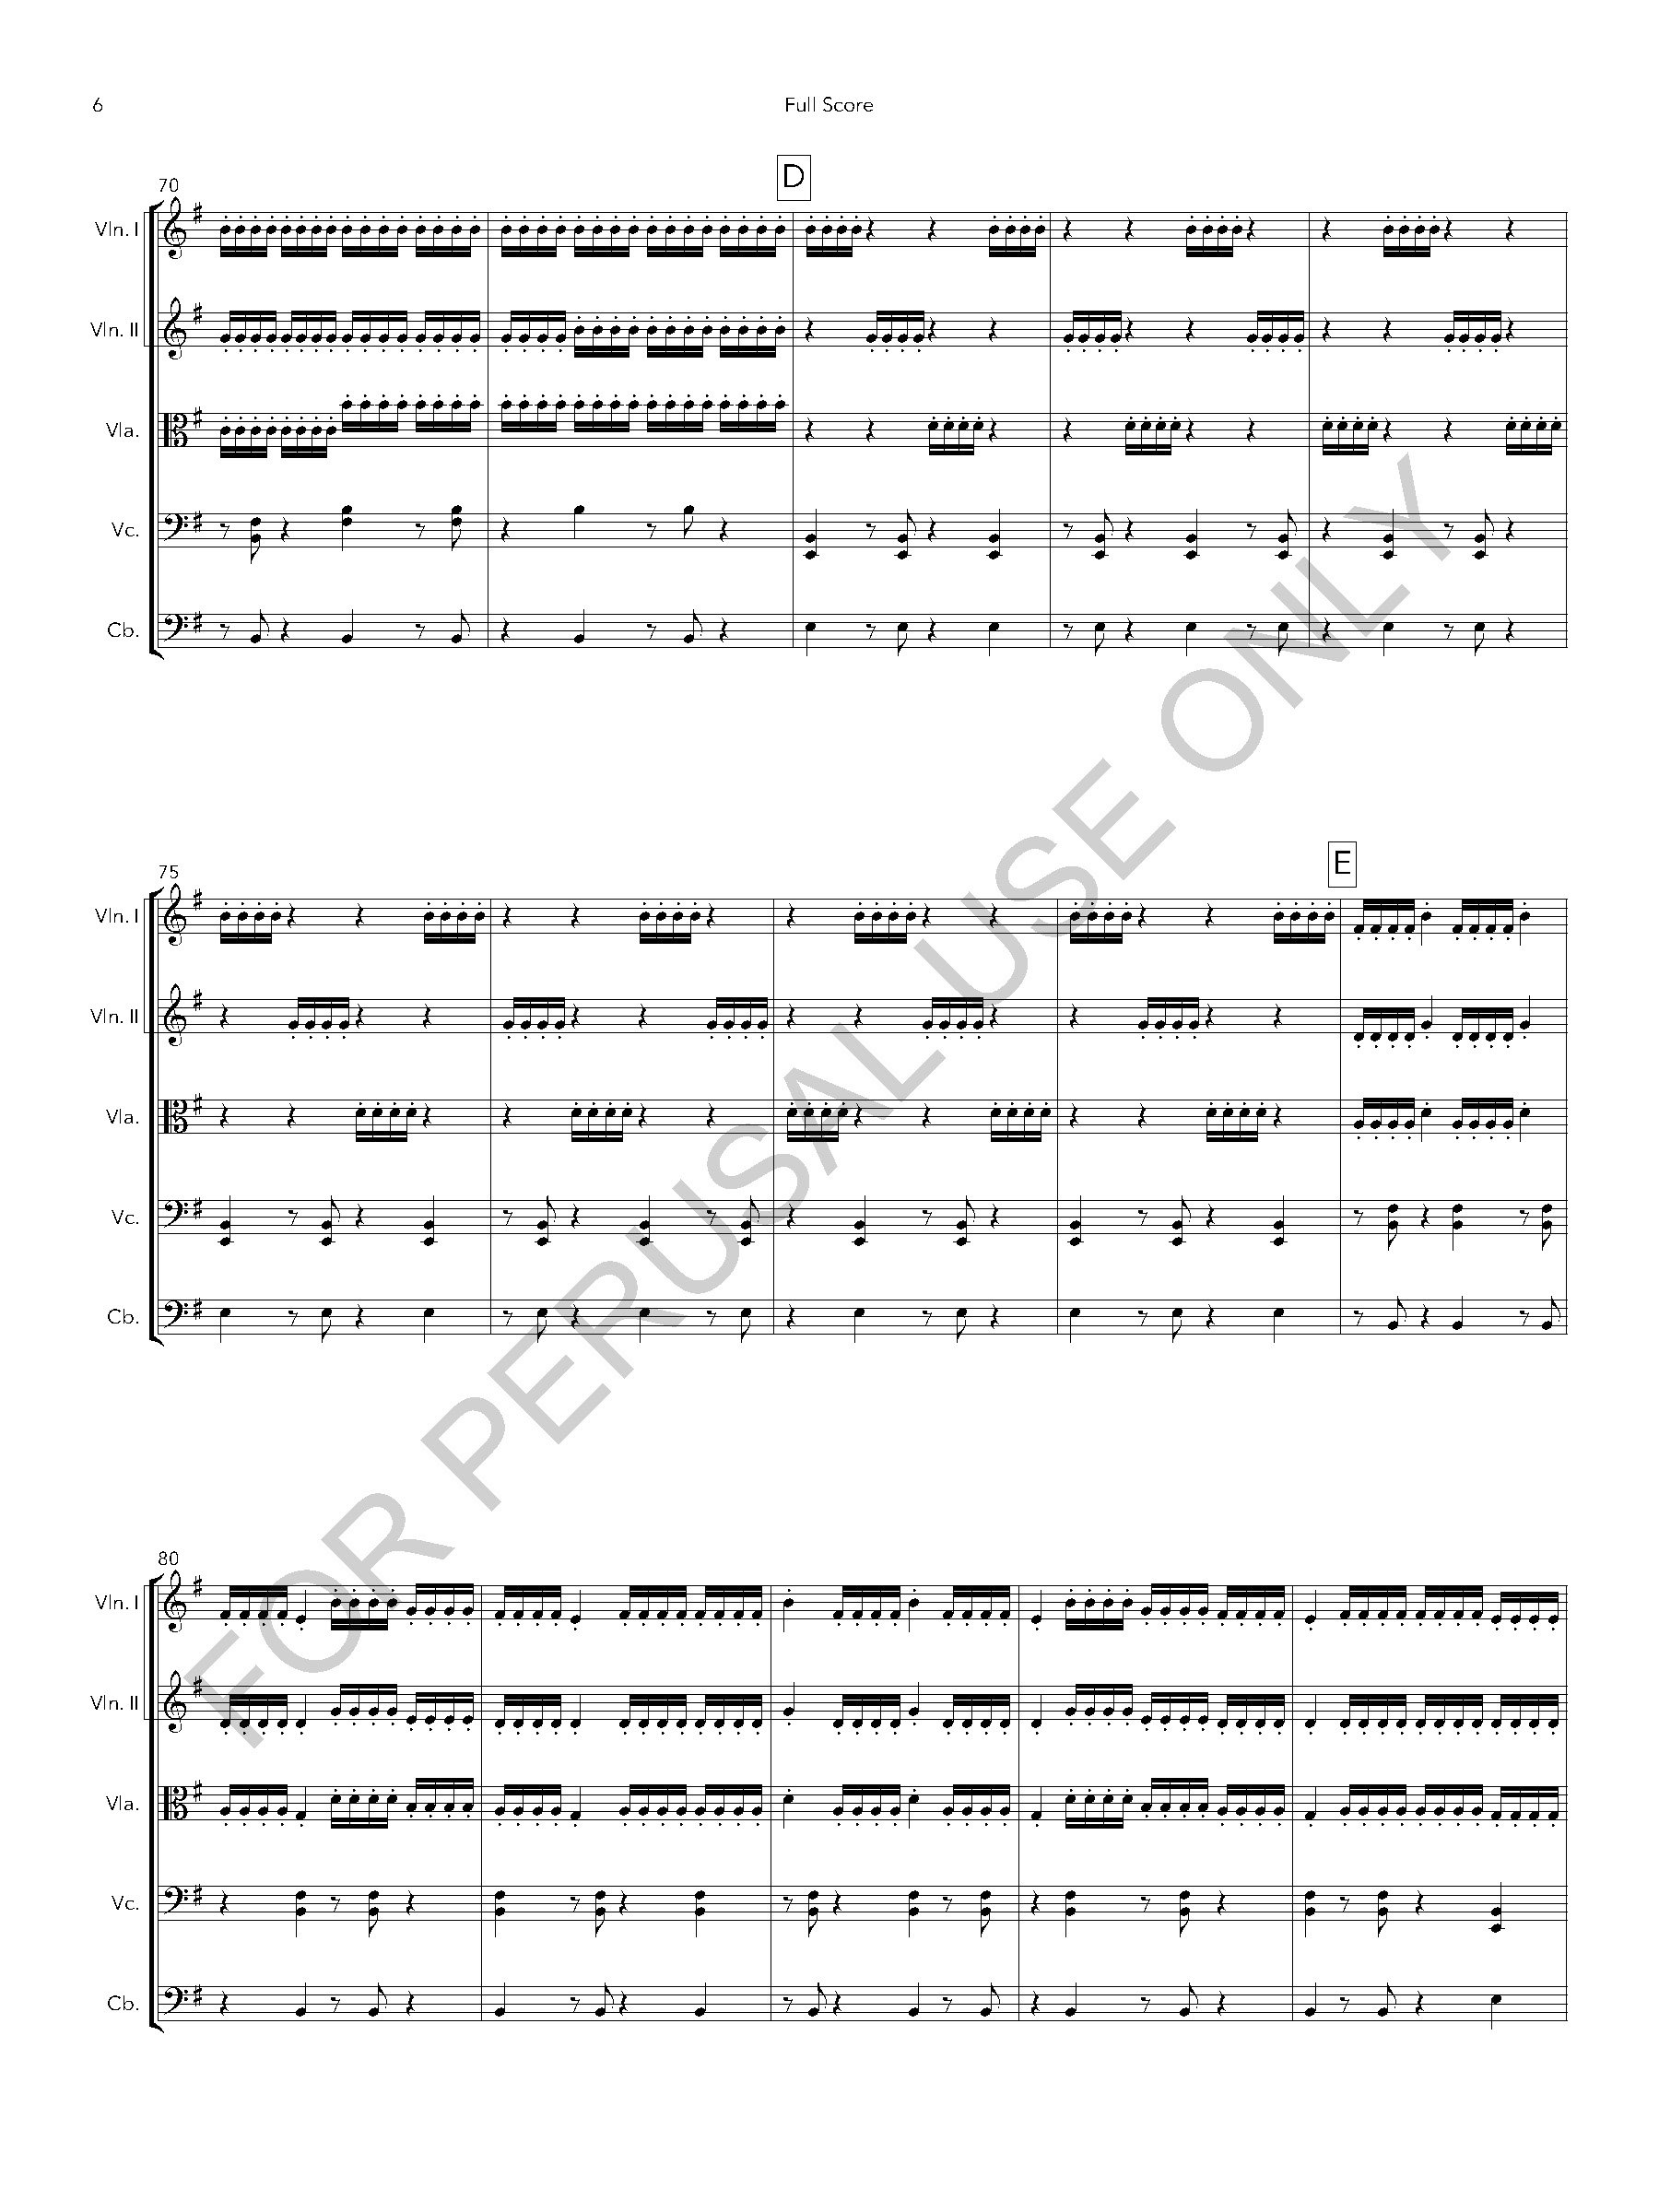 Face of Another - arr. for string orchestra - Full Score_Page_06.jpg